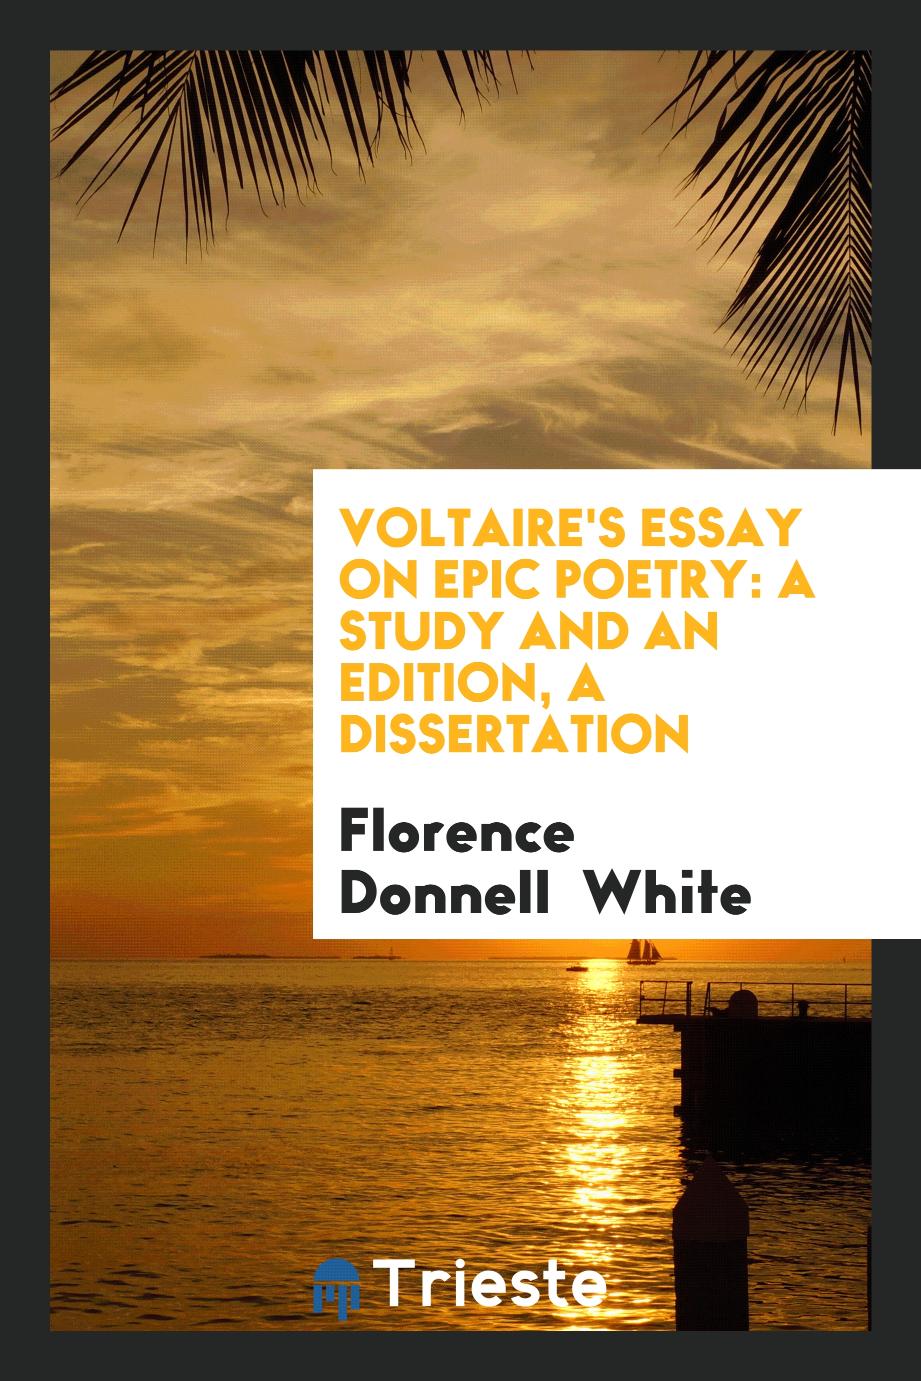 Voltaire's Essay on Epic Poetry: A Study and an Edition, a Dissertation